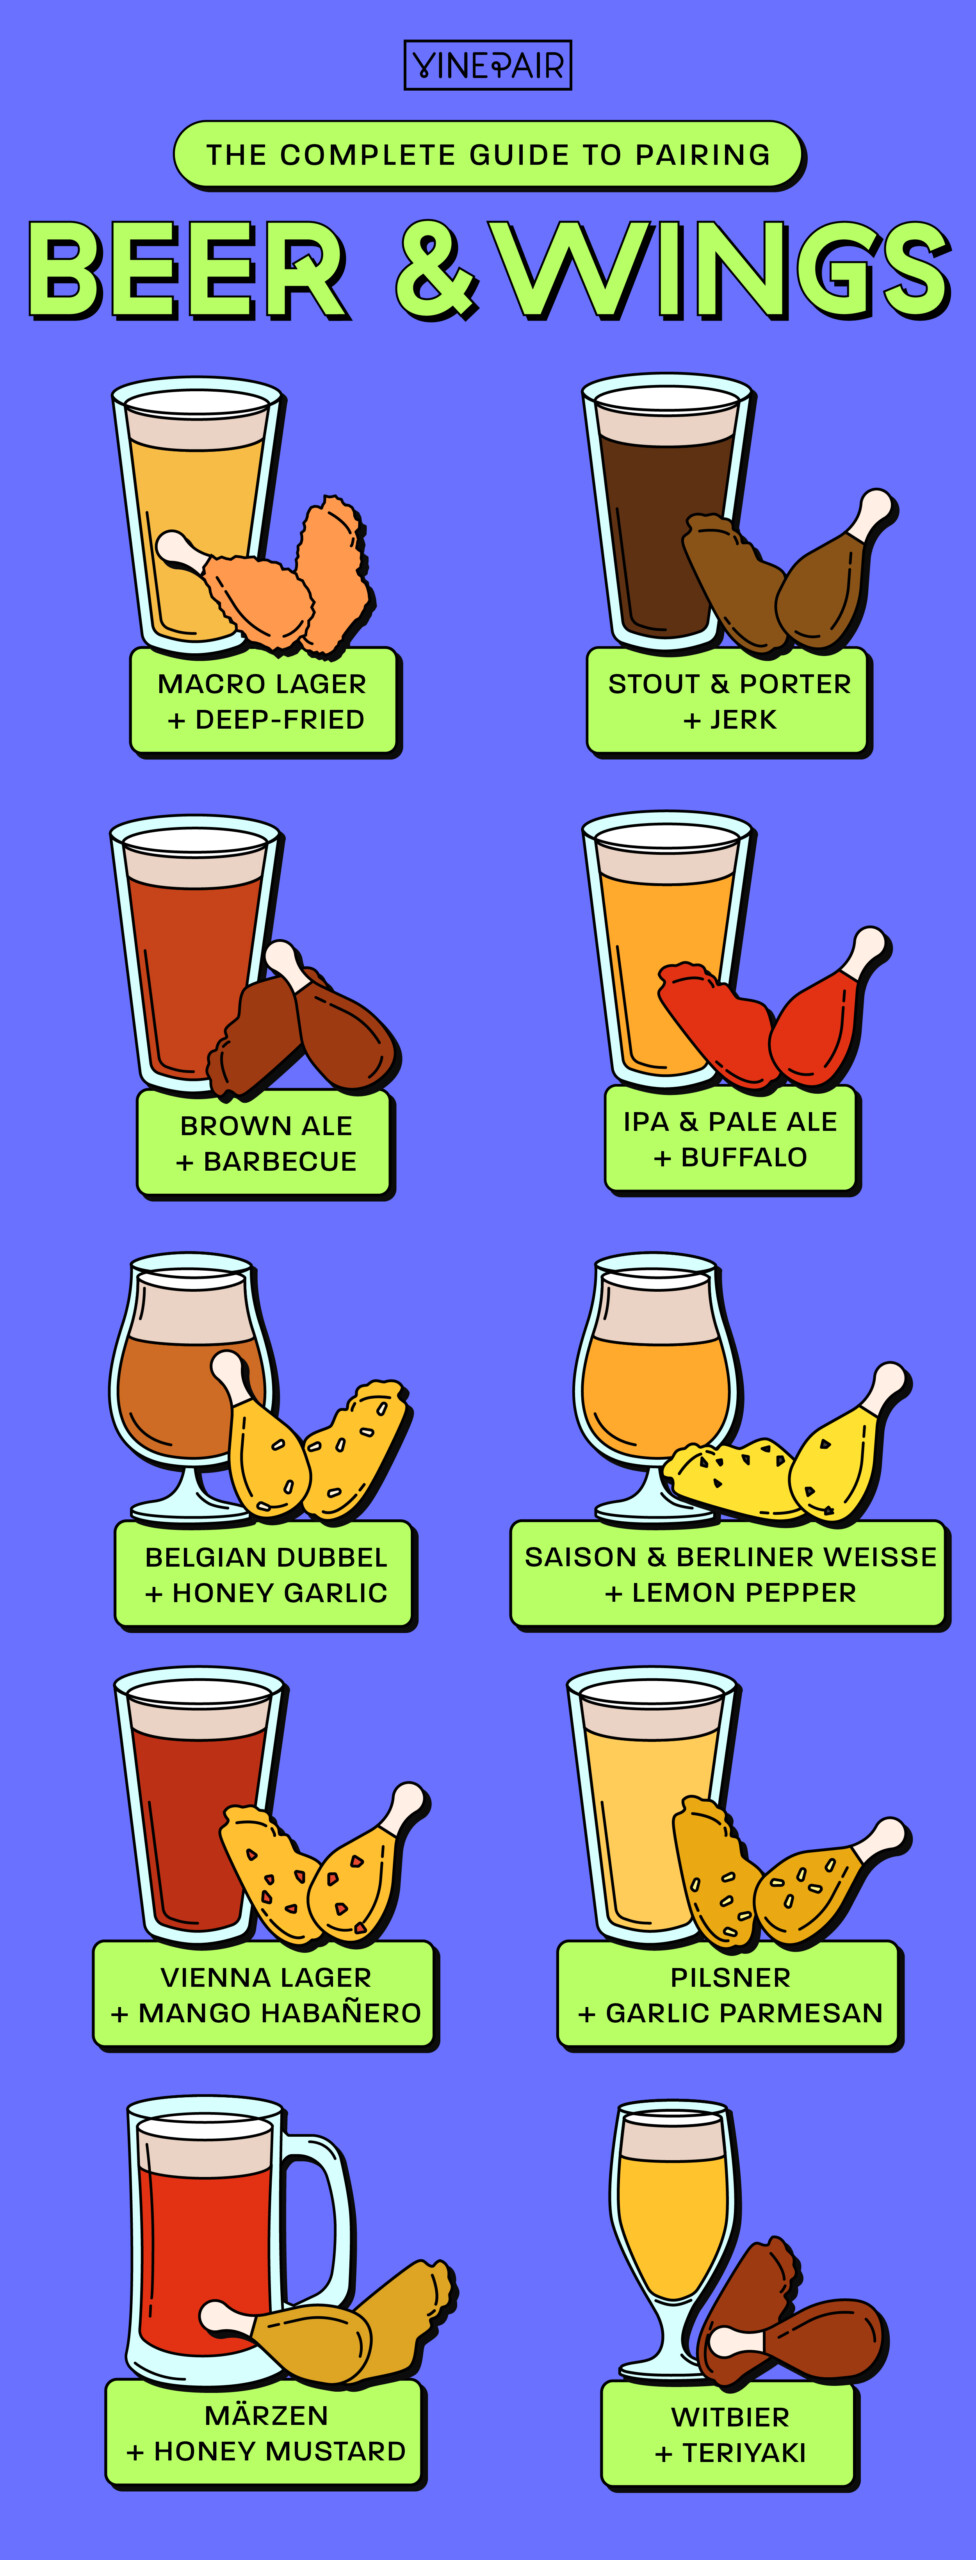 The Complete Guide to Pairing Beer and Wings [Infographic]